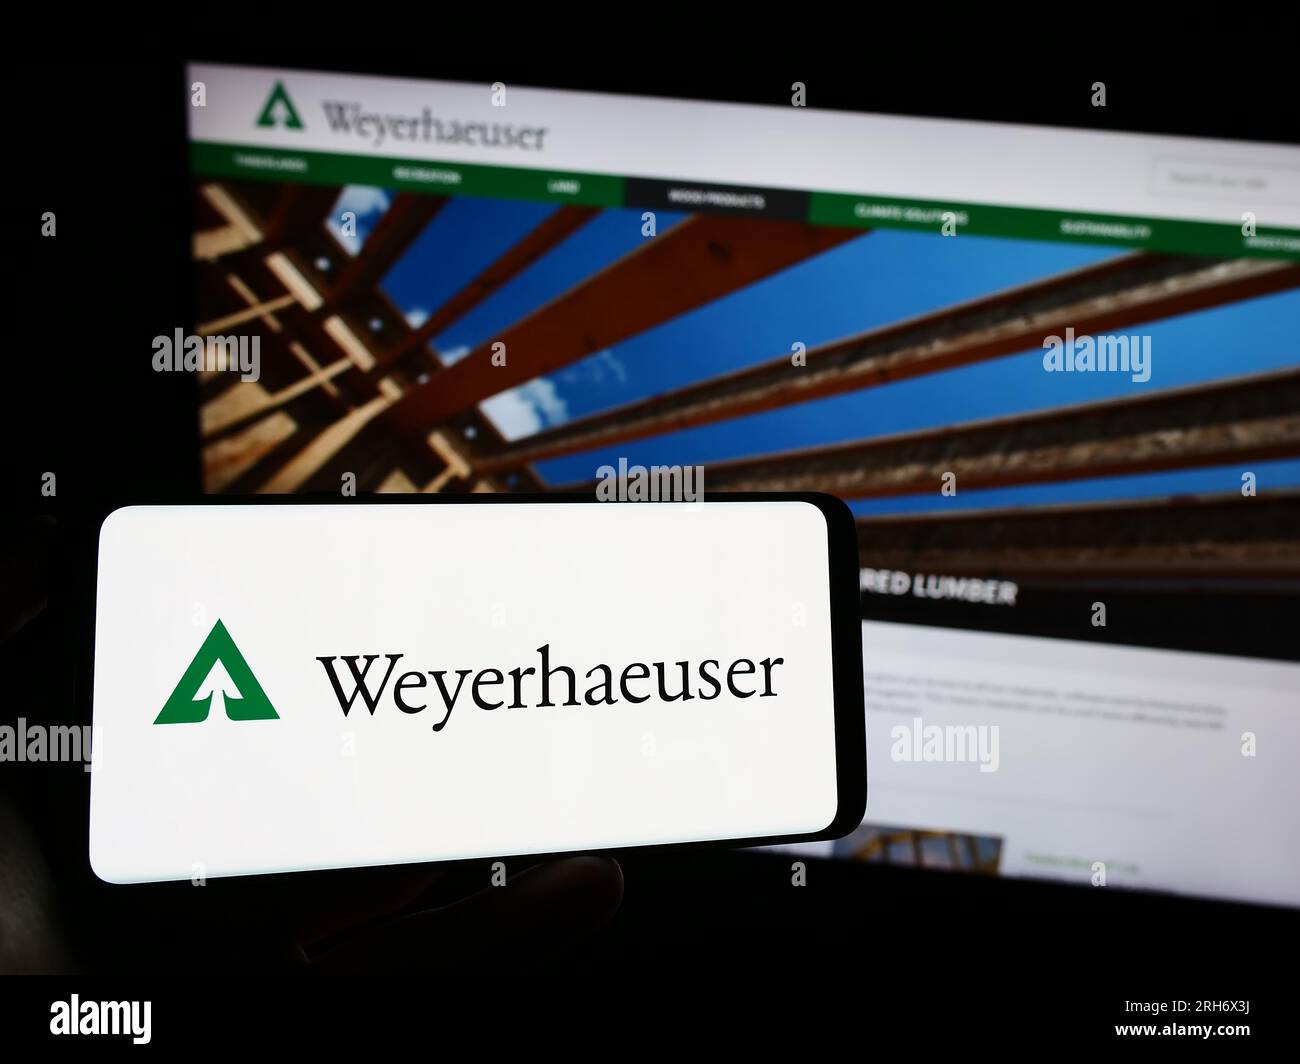 Person holding cellphone with logo of US timberland business Weyerhaeuser Company on screen in front of business webpage. Focus on phone display. Stock Photo